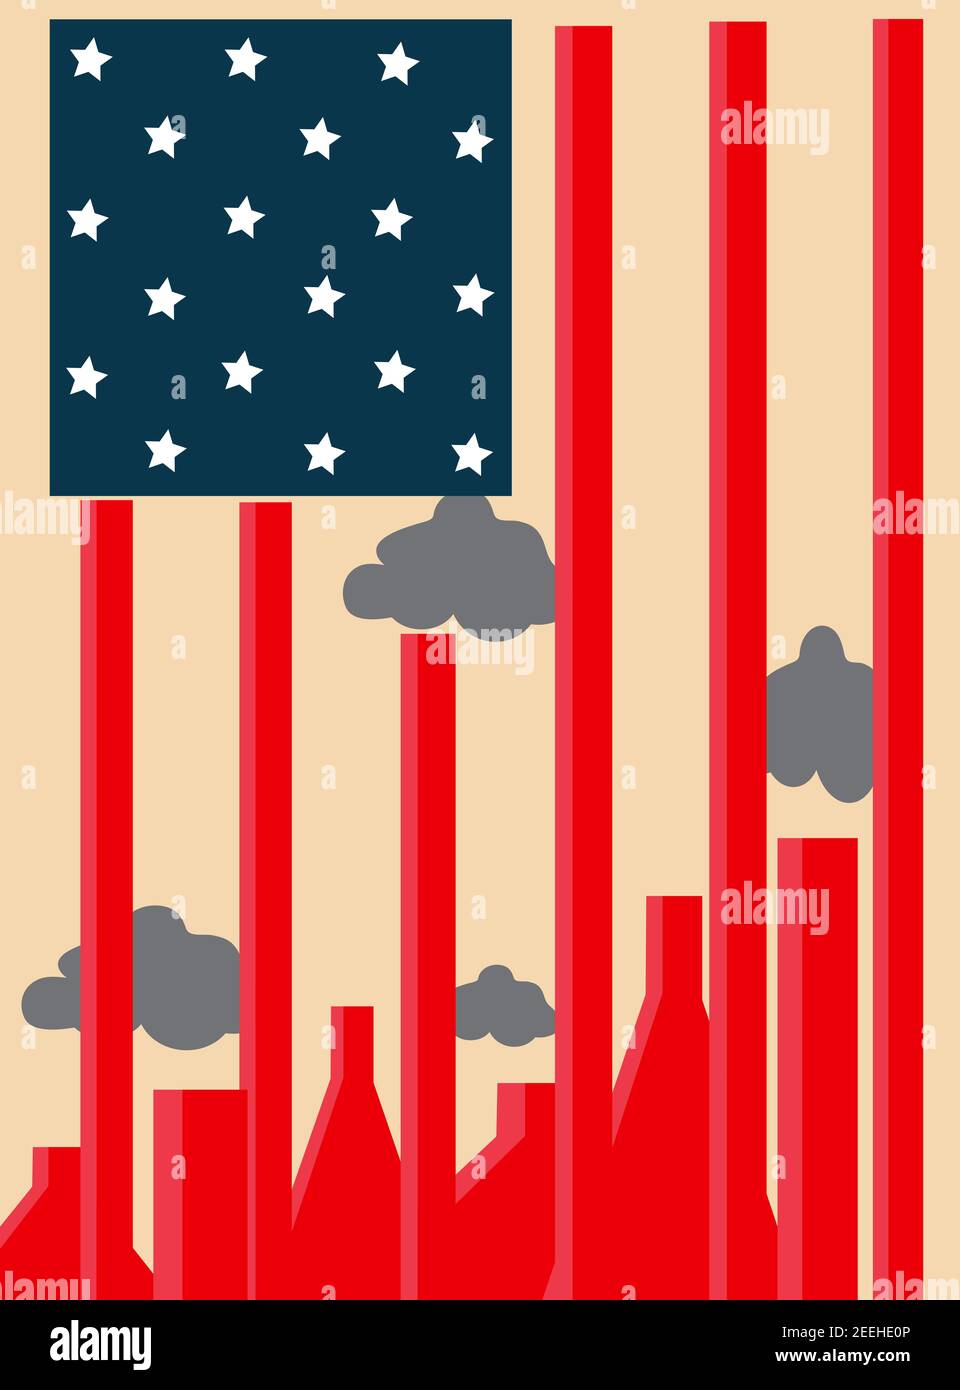 illustration of the american flag and various factories at the bottom that pollute the environment, on a red background Stock Photo